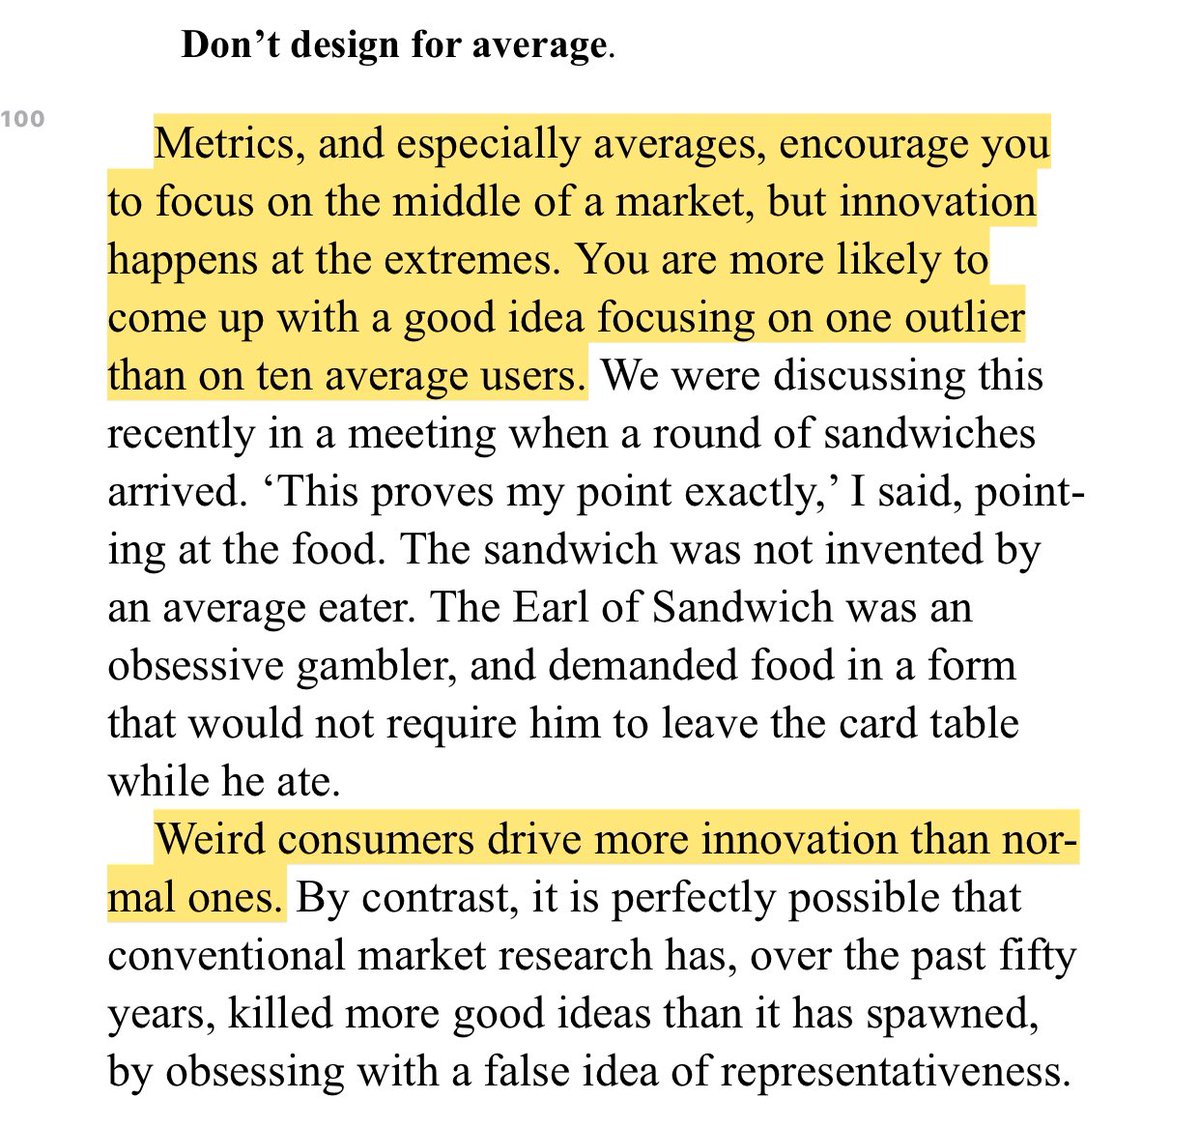 “Metrics, and especially averages, encourage you to focus on the middle of a market, but innovation happens at the extremes. You are more likely to come up with a good idea focusing on one outlier than on ten average users.”